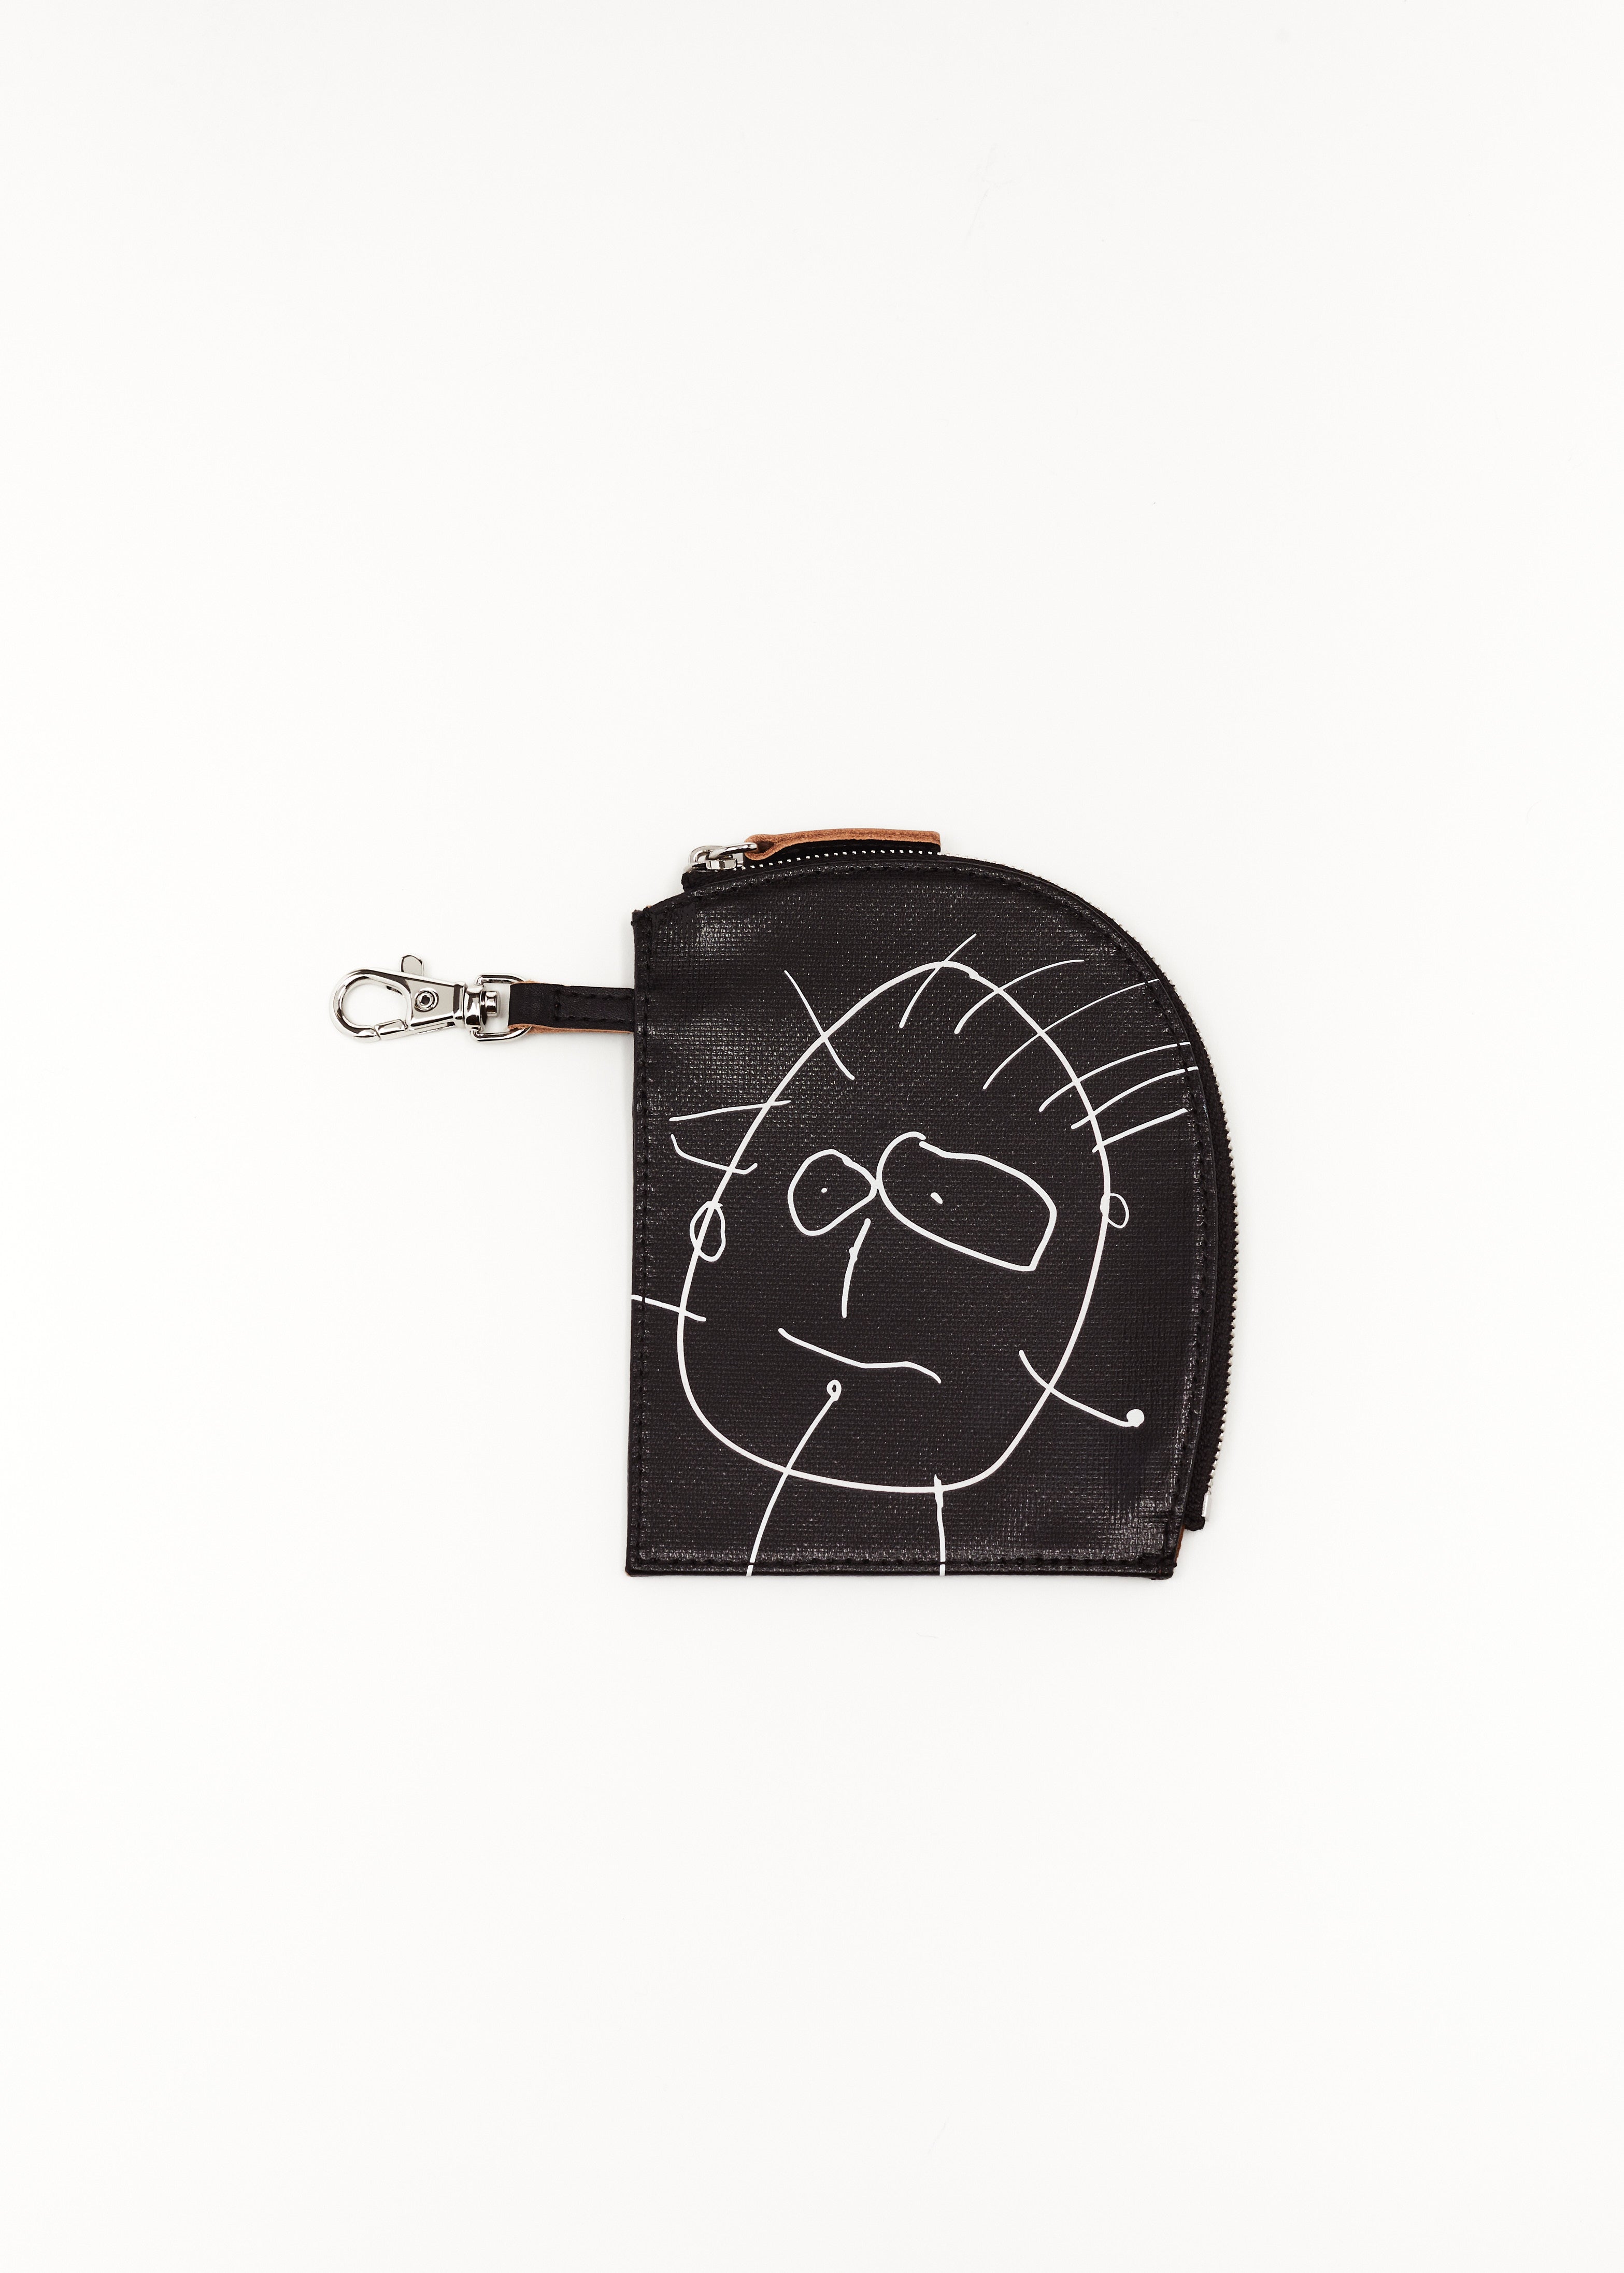 "PILI AND BIANCA" BLACK LEATHER CROSSBODY BELT WITH WALLETS